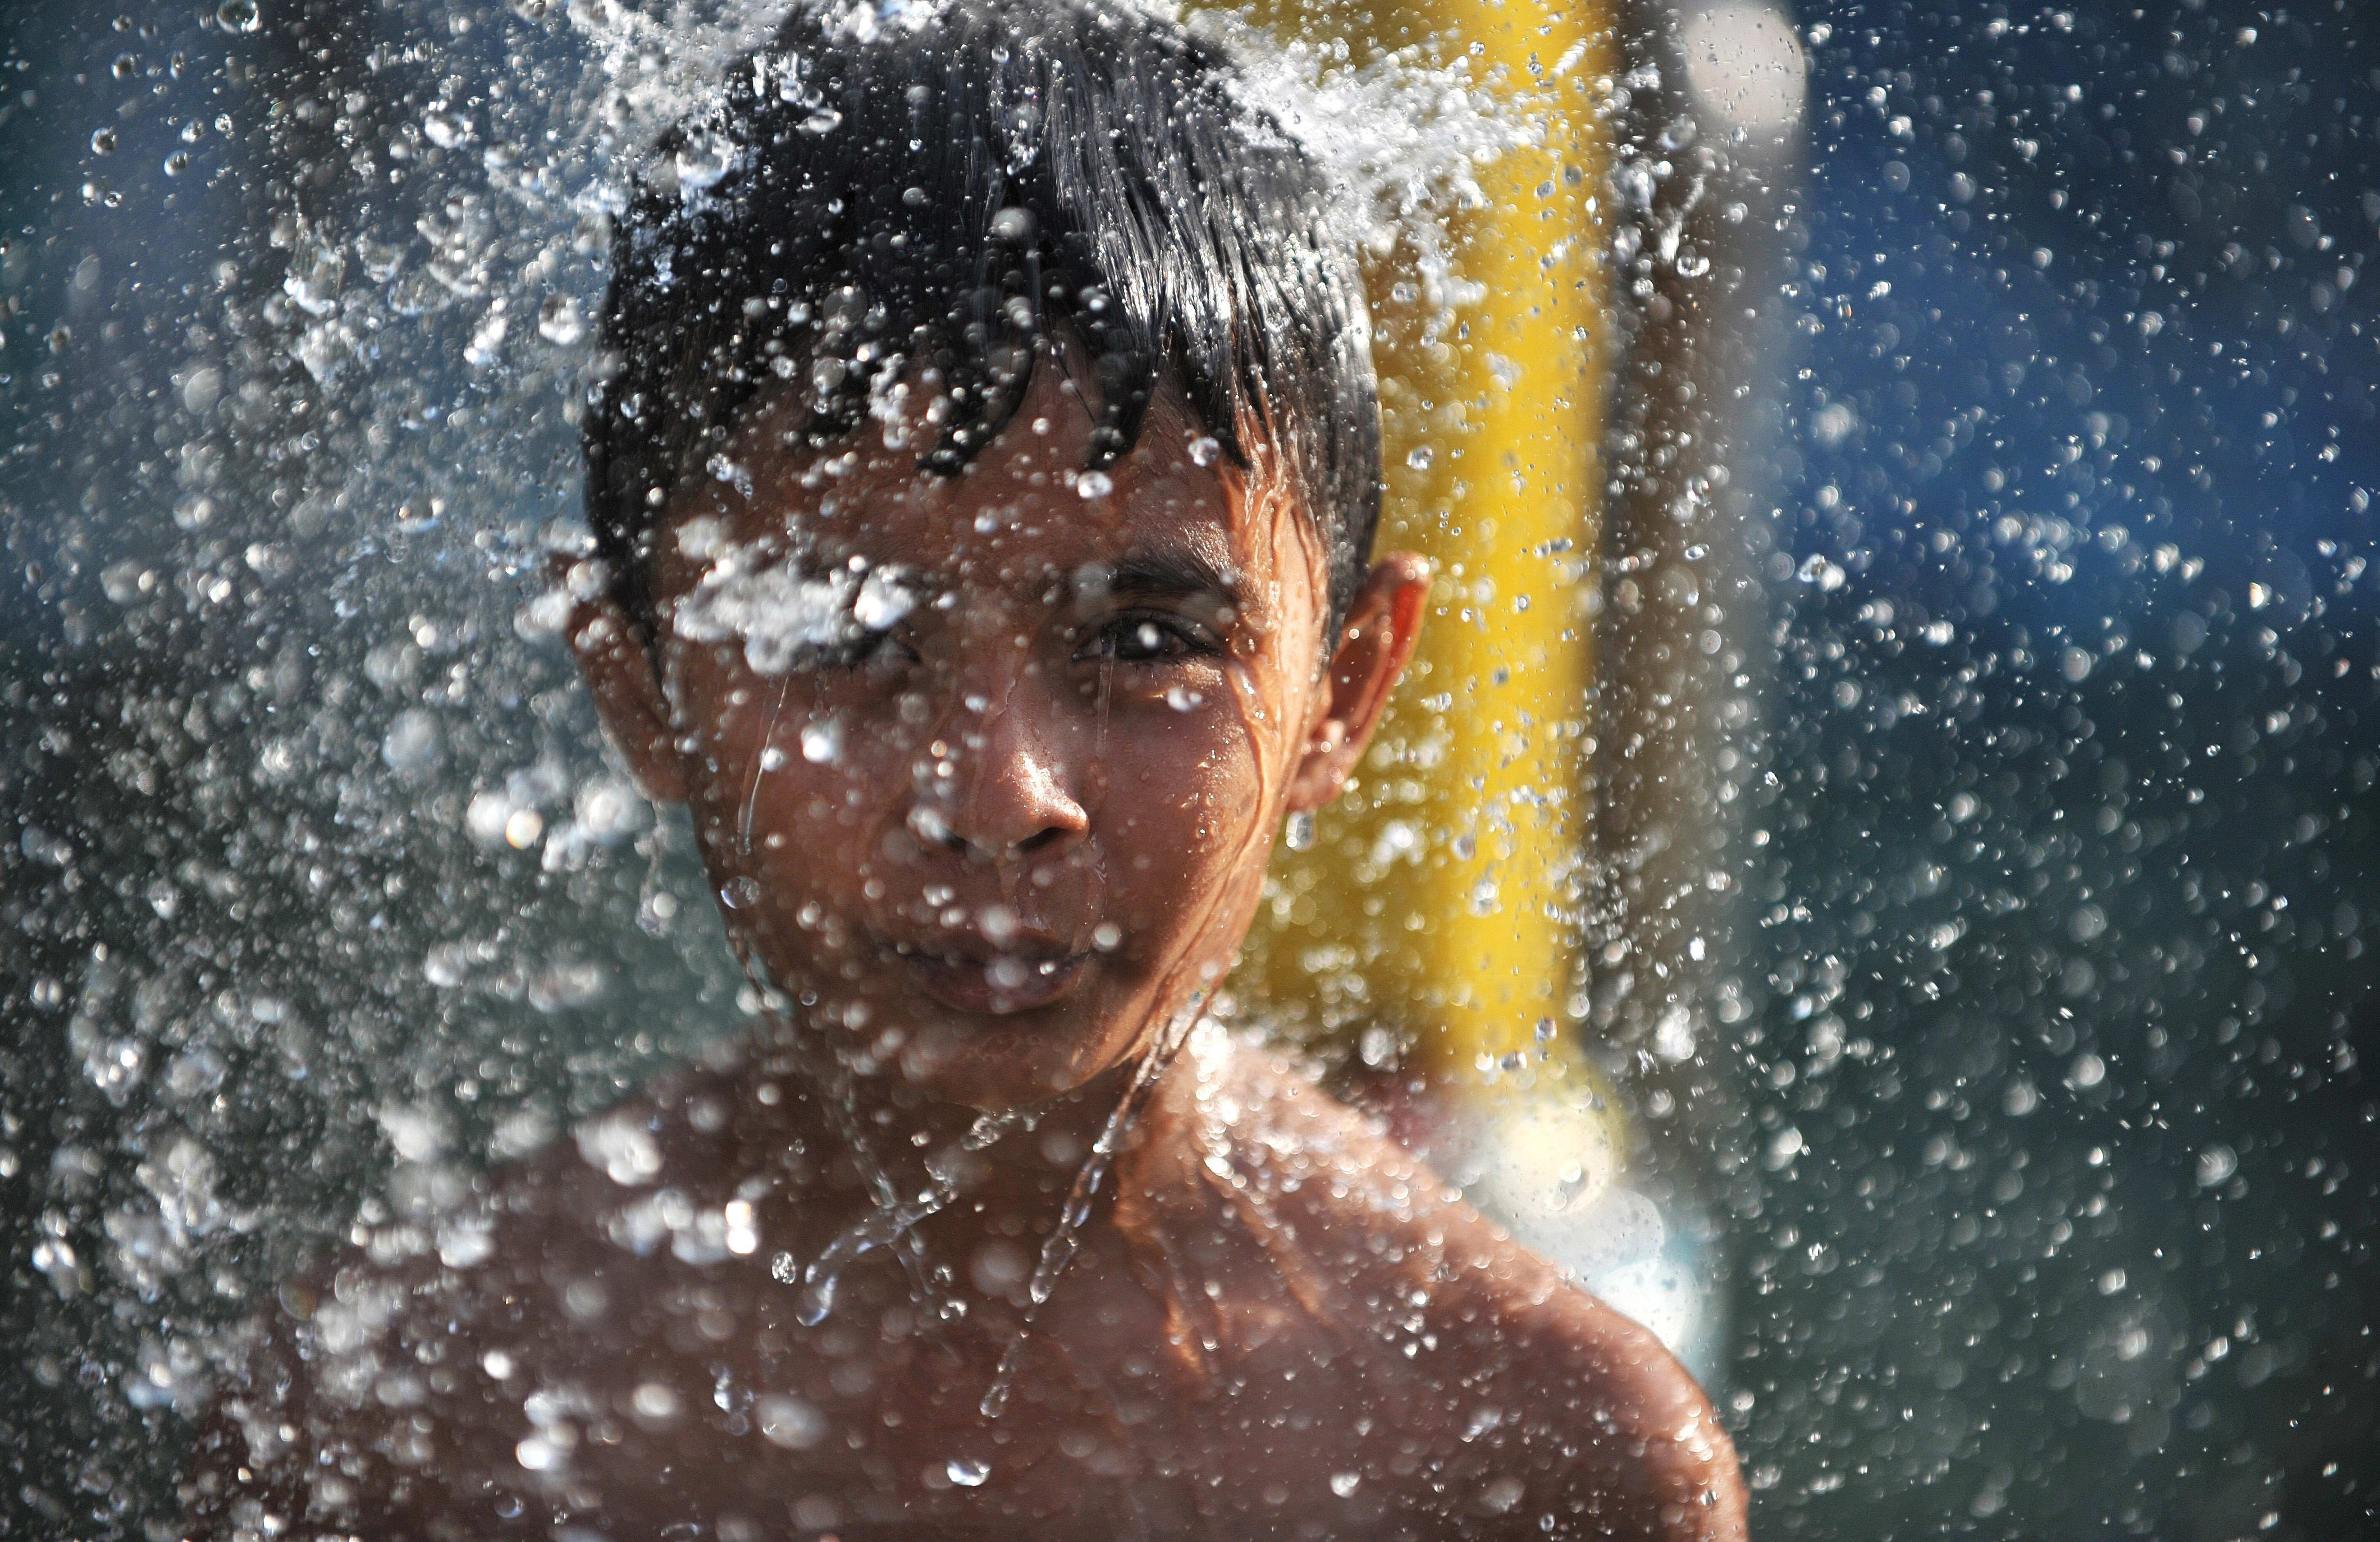 An Indian child cools off under a fountain at a water park in Hyderabad